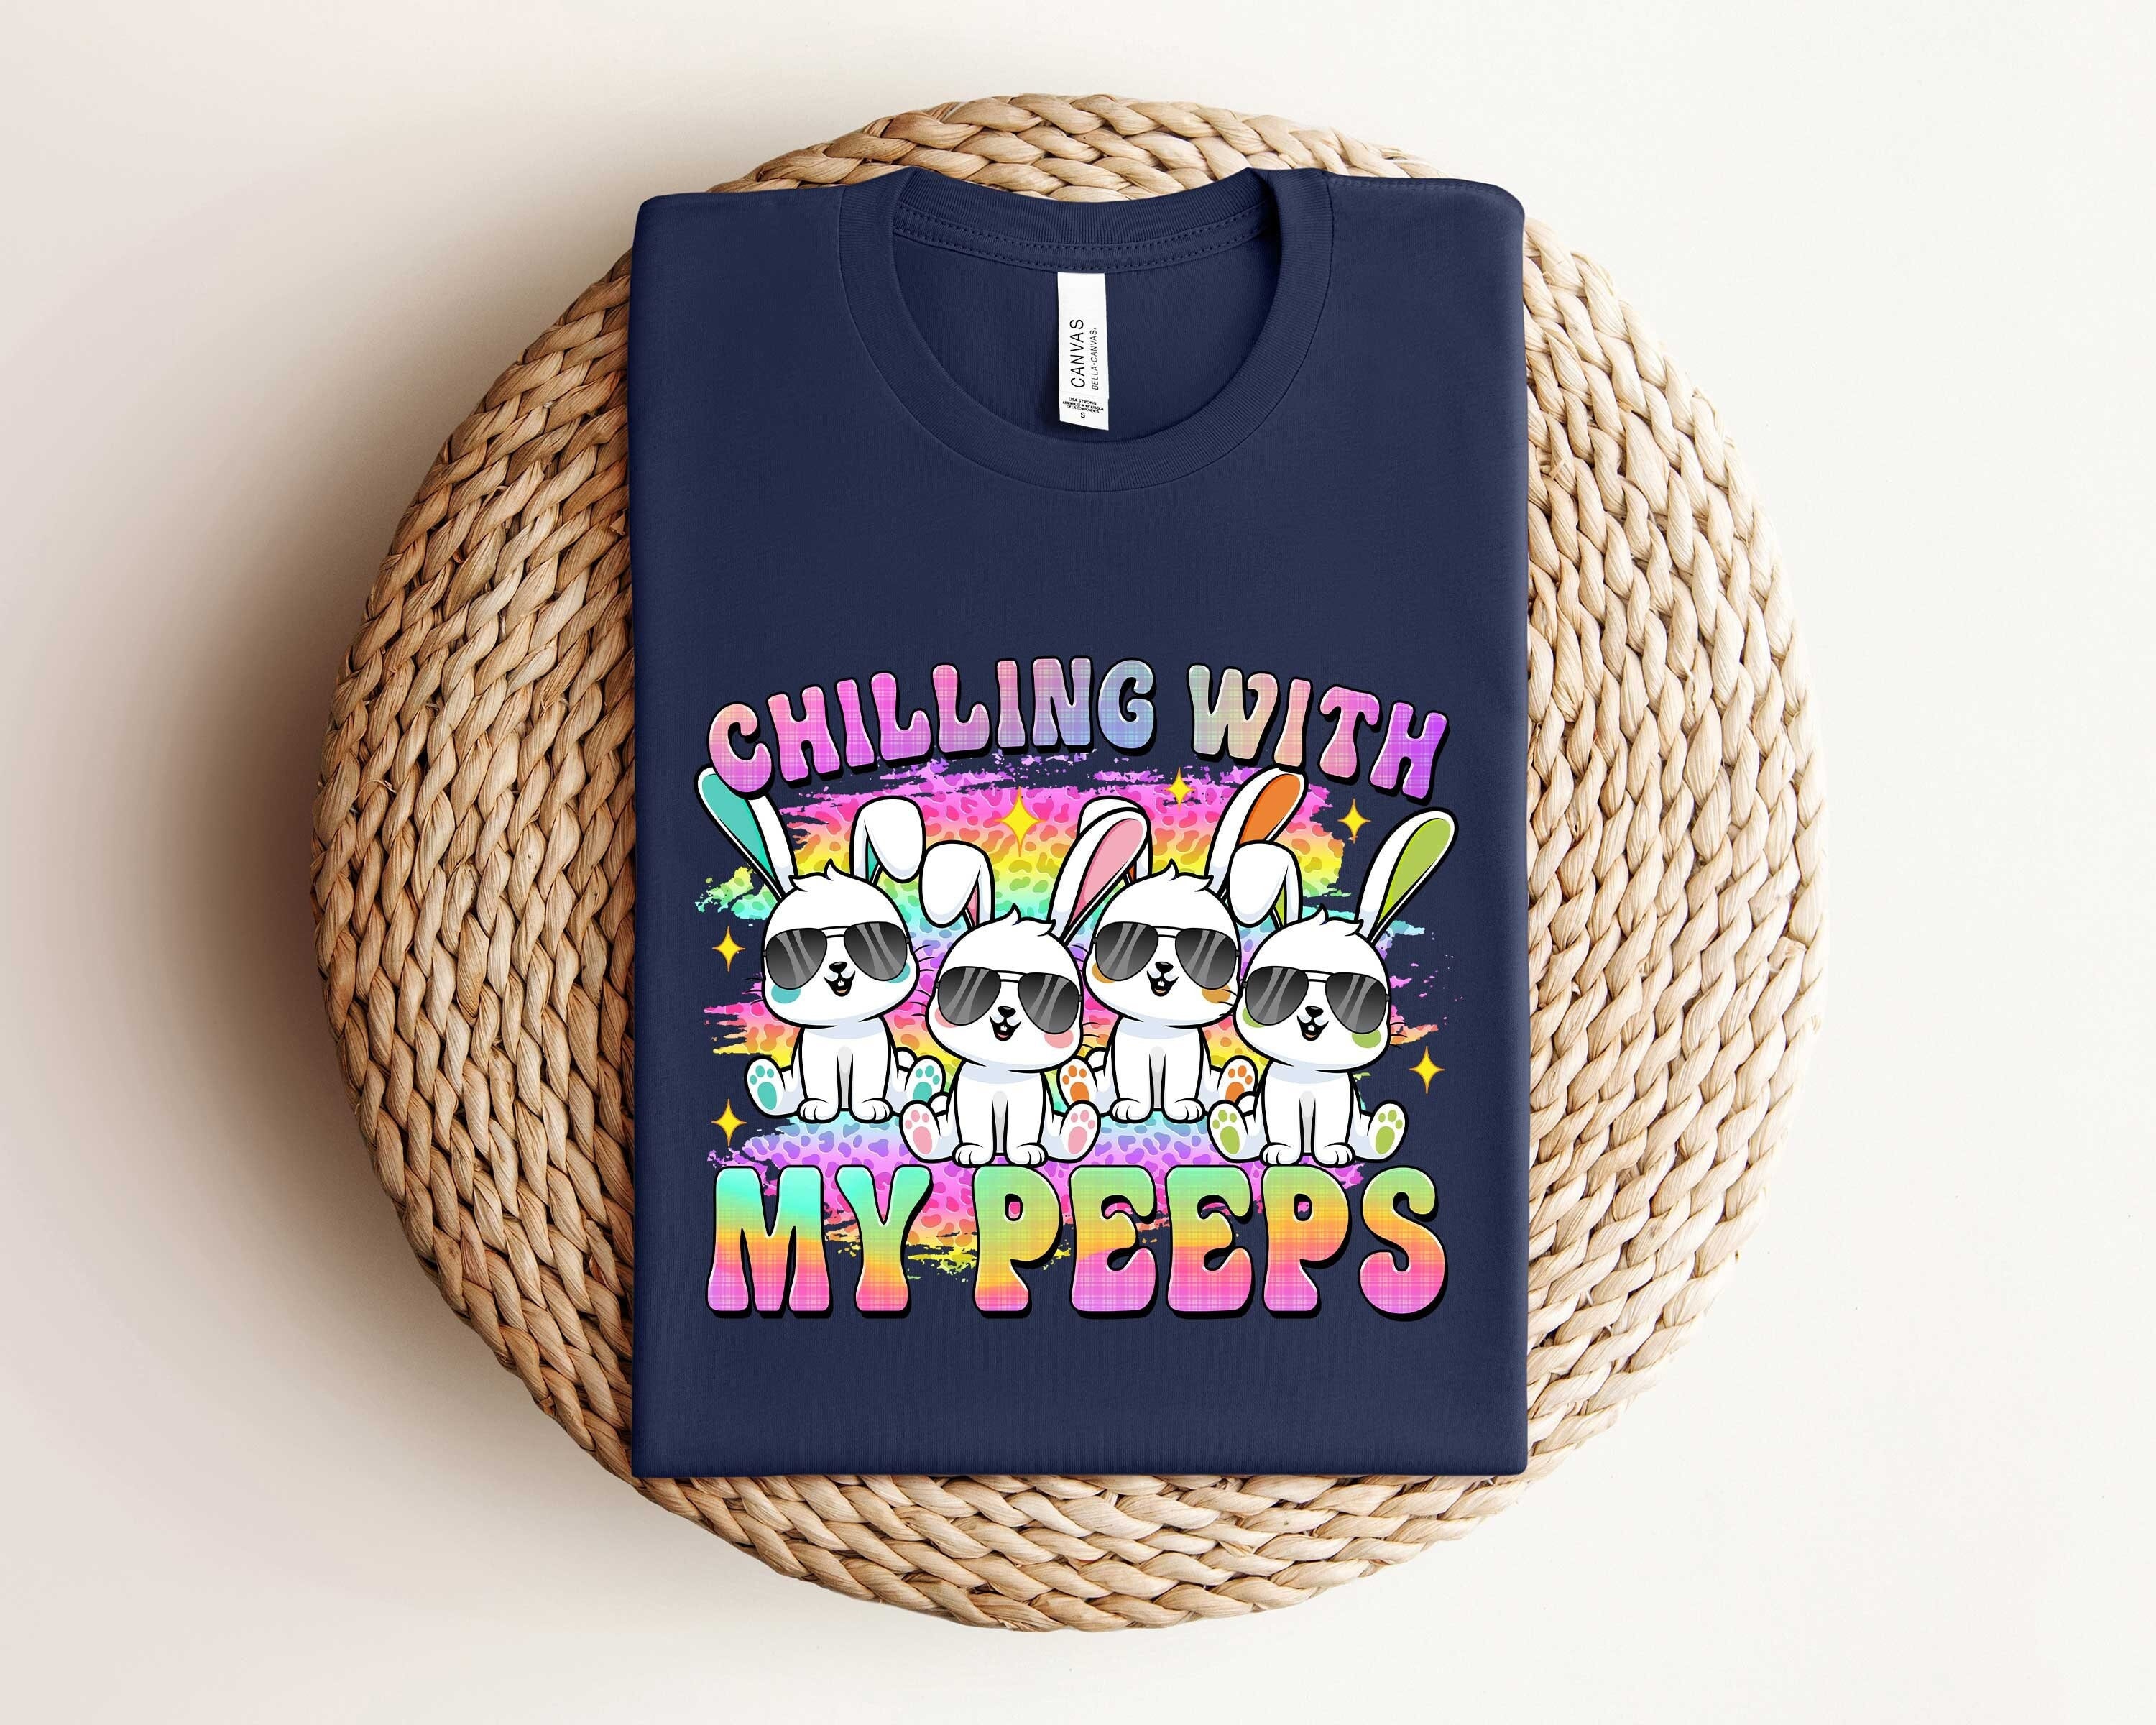 artist bunny shirt chilling with my peeps shirt funny toddler shirt for easter 5905 f4vkq